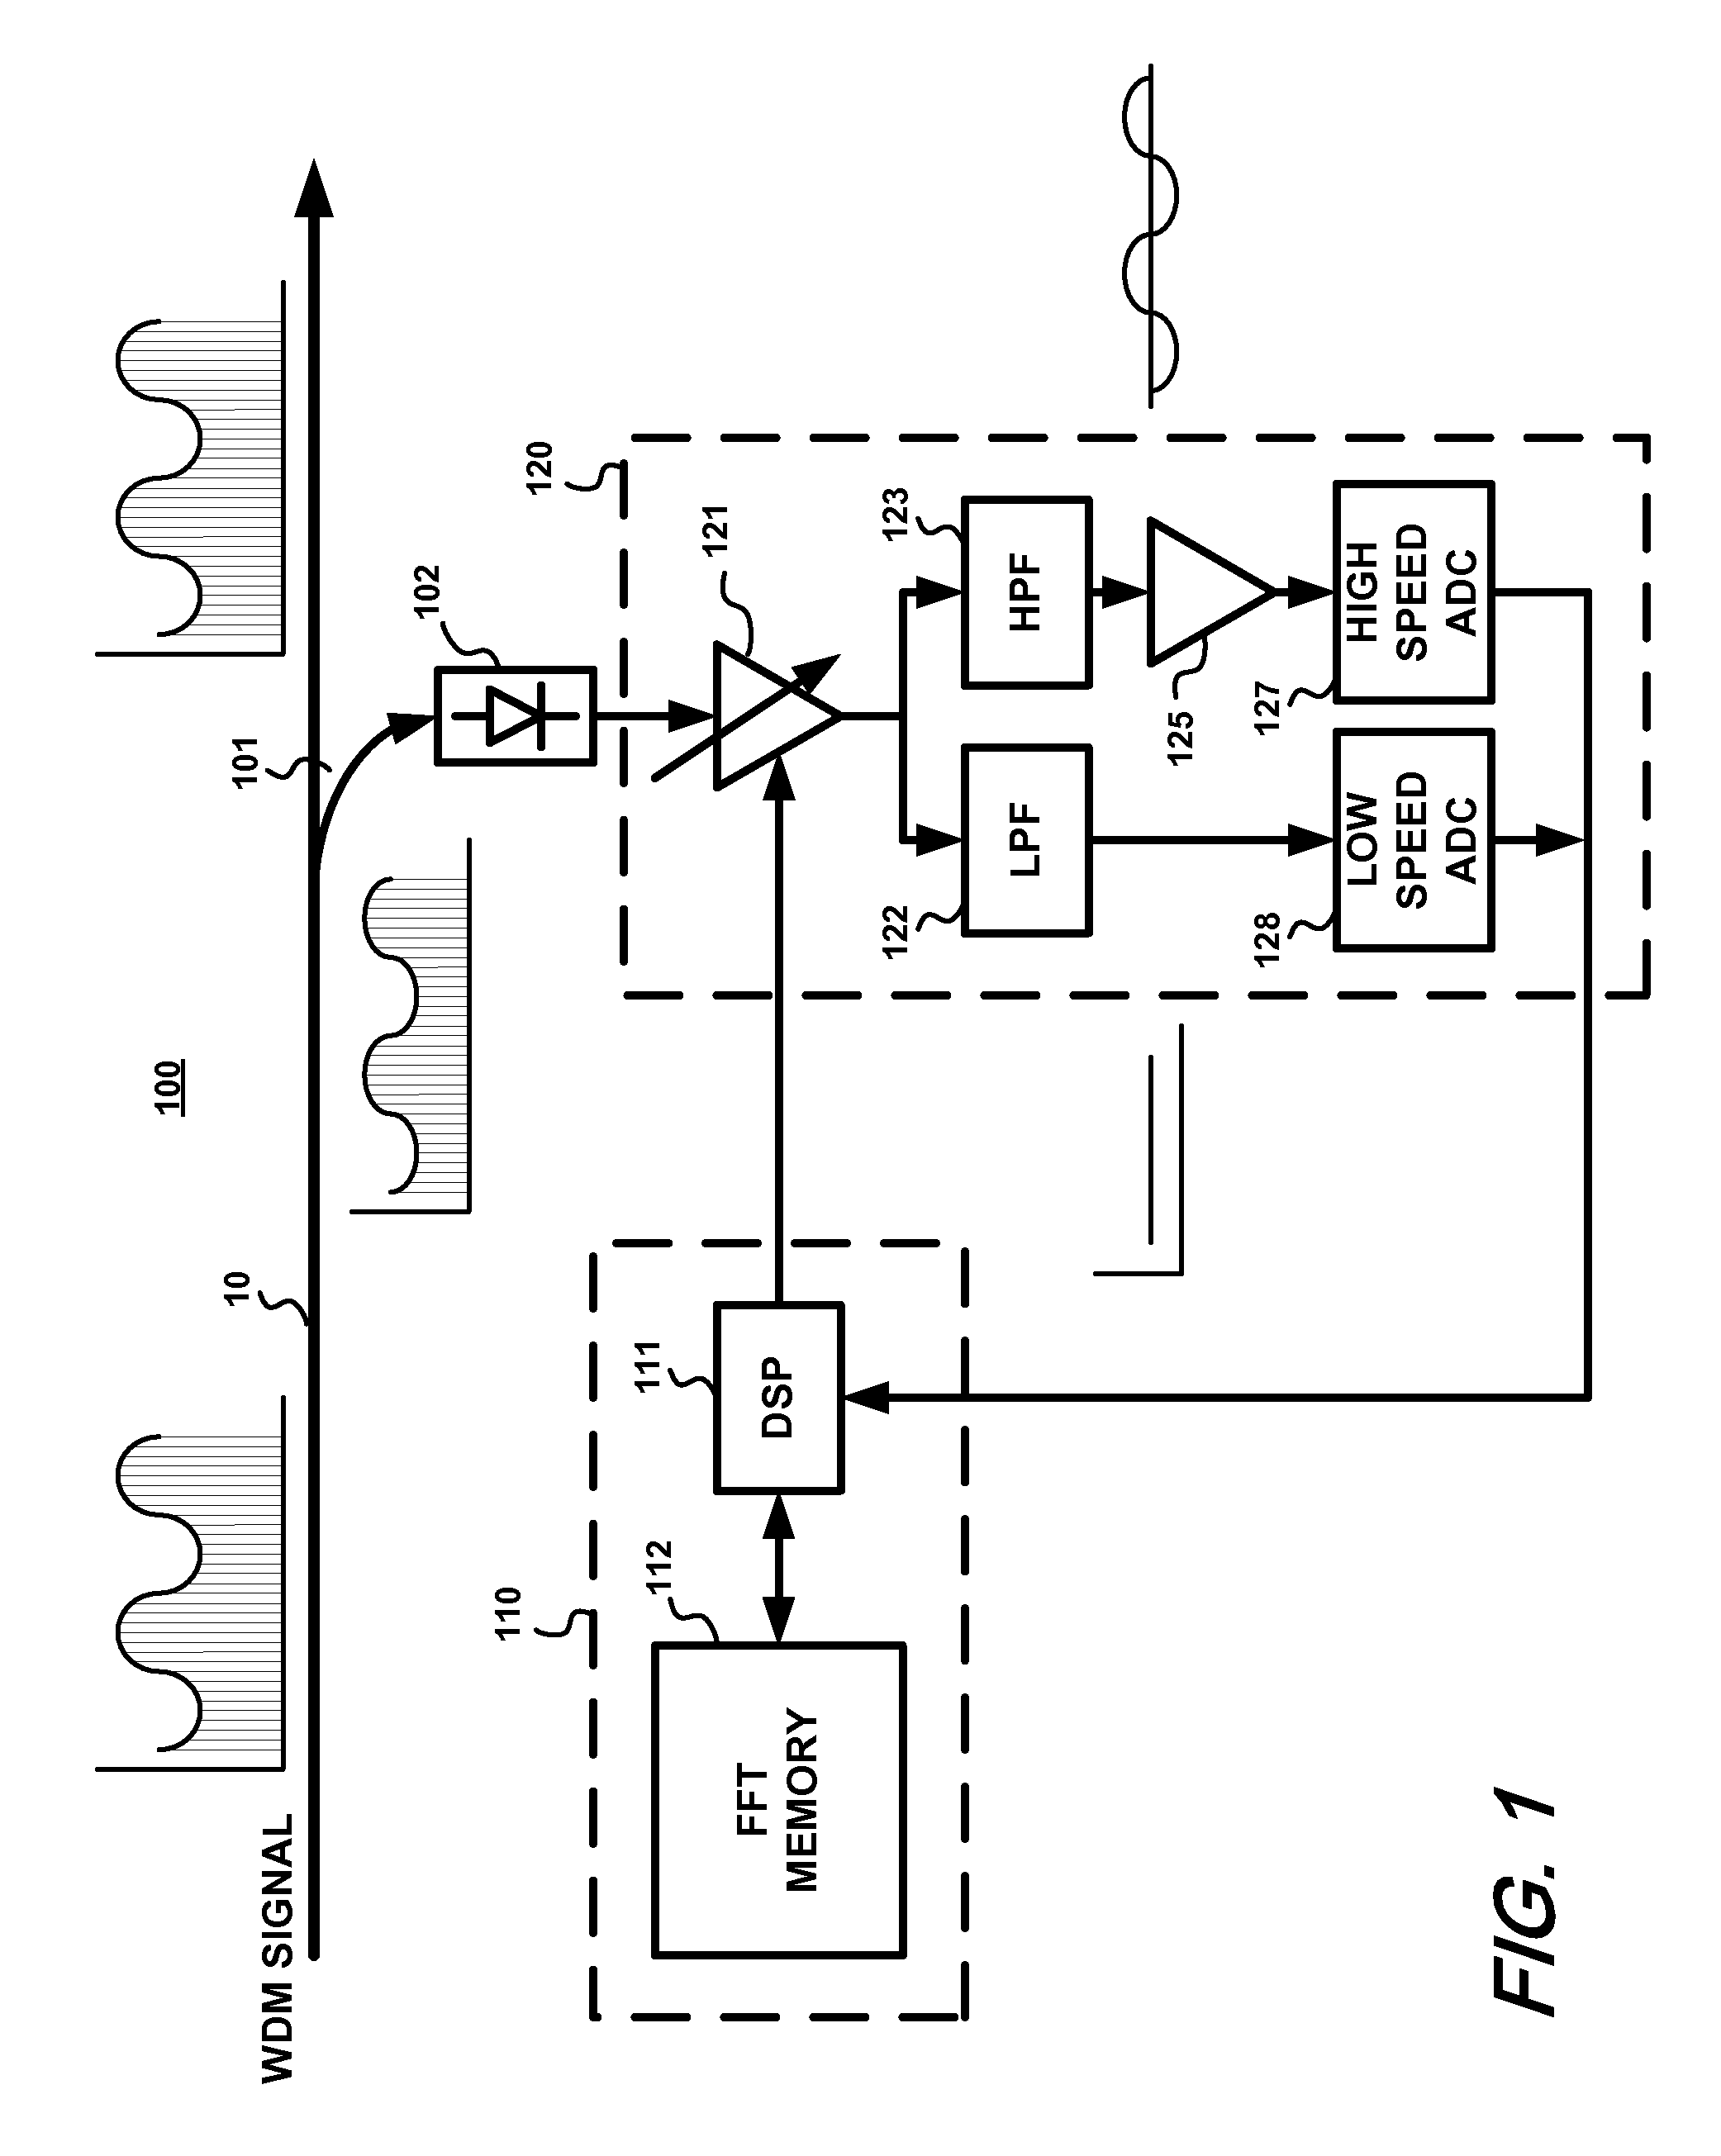 Apparatus and method for improving the tolerance of tone-based optical channel monitoring to stimulated raman scattering